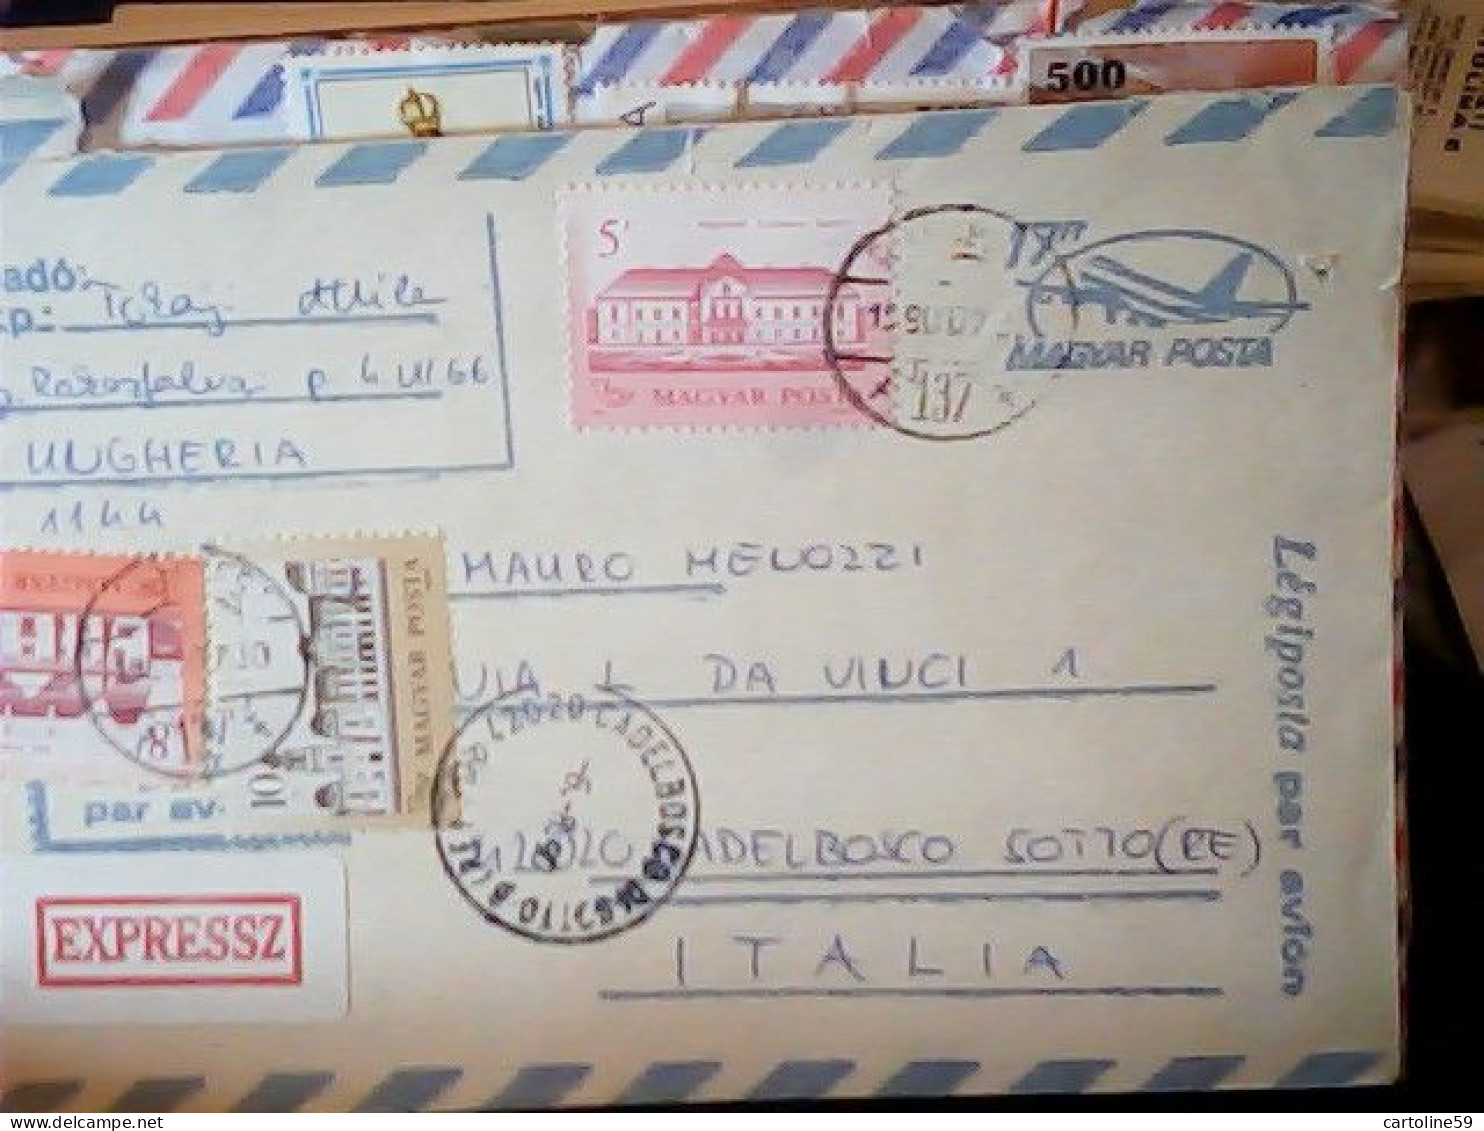 2 BUSTE UNGHERIA (HUNGERY )- MAGYAR 1990 Airmail  3 5 8 10 20 FT JR5043 - Lettres & Documents